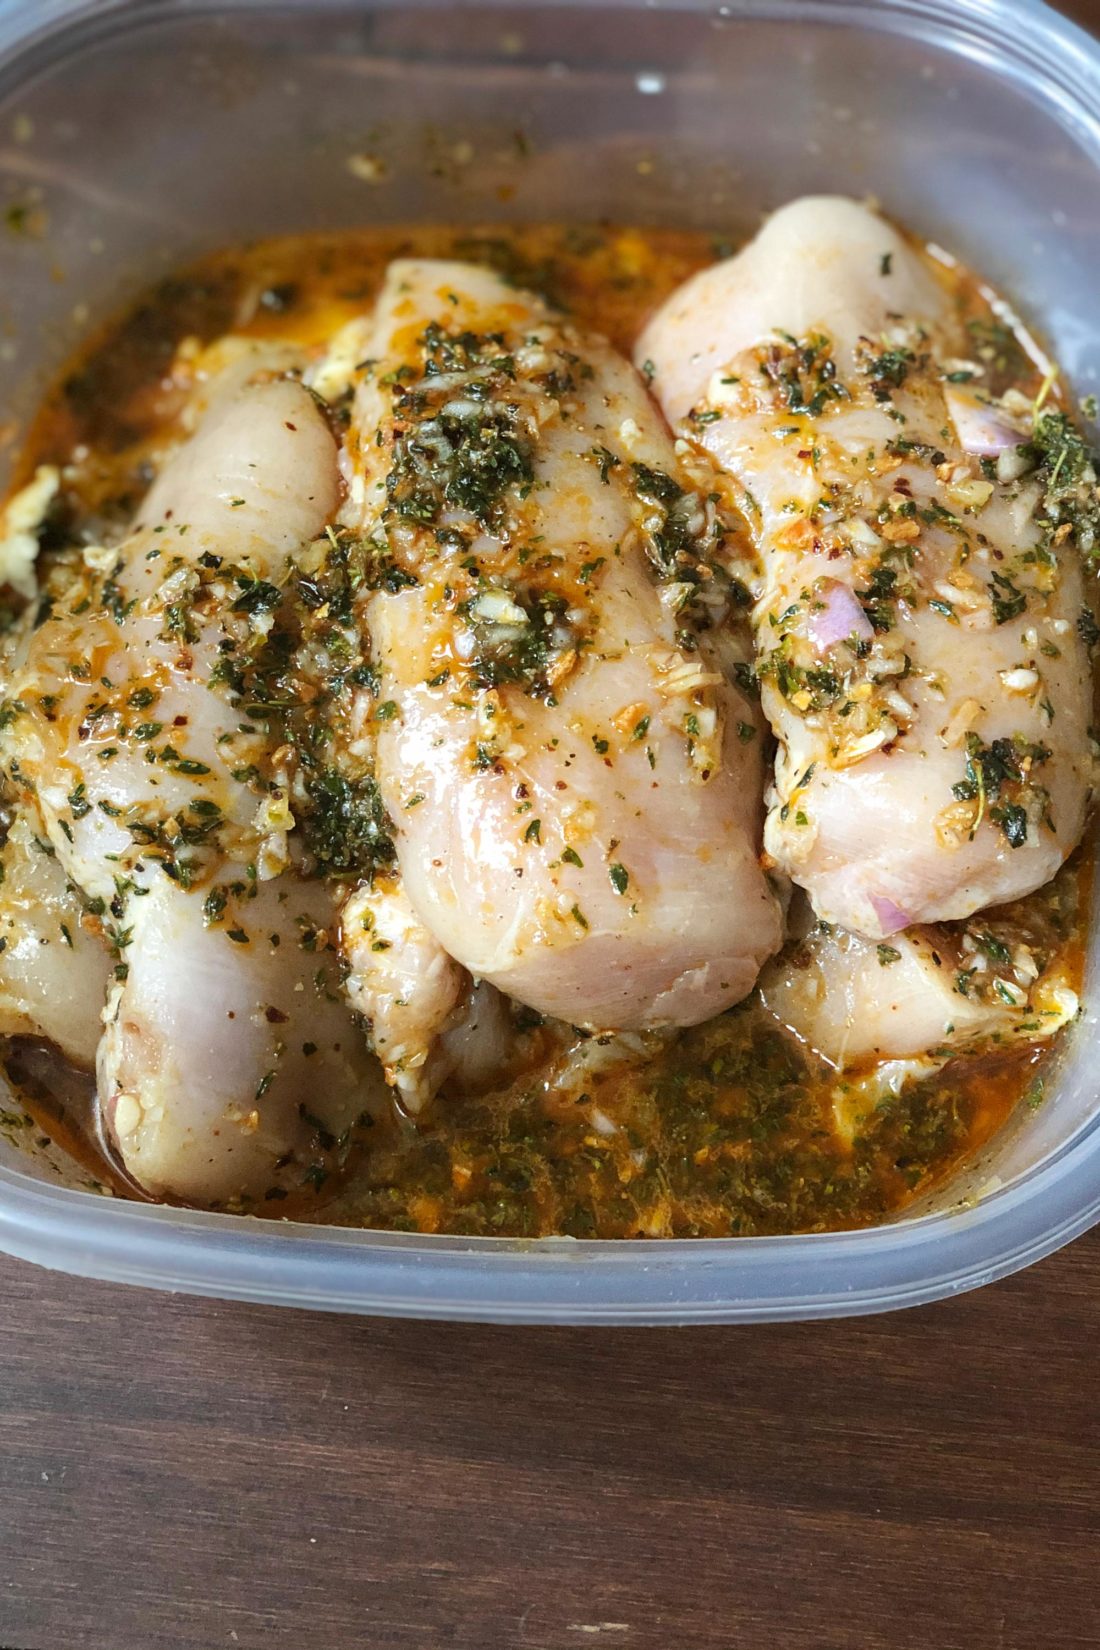 Orange, Chili and Thyme Grilled Chicken